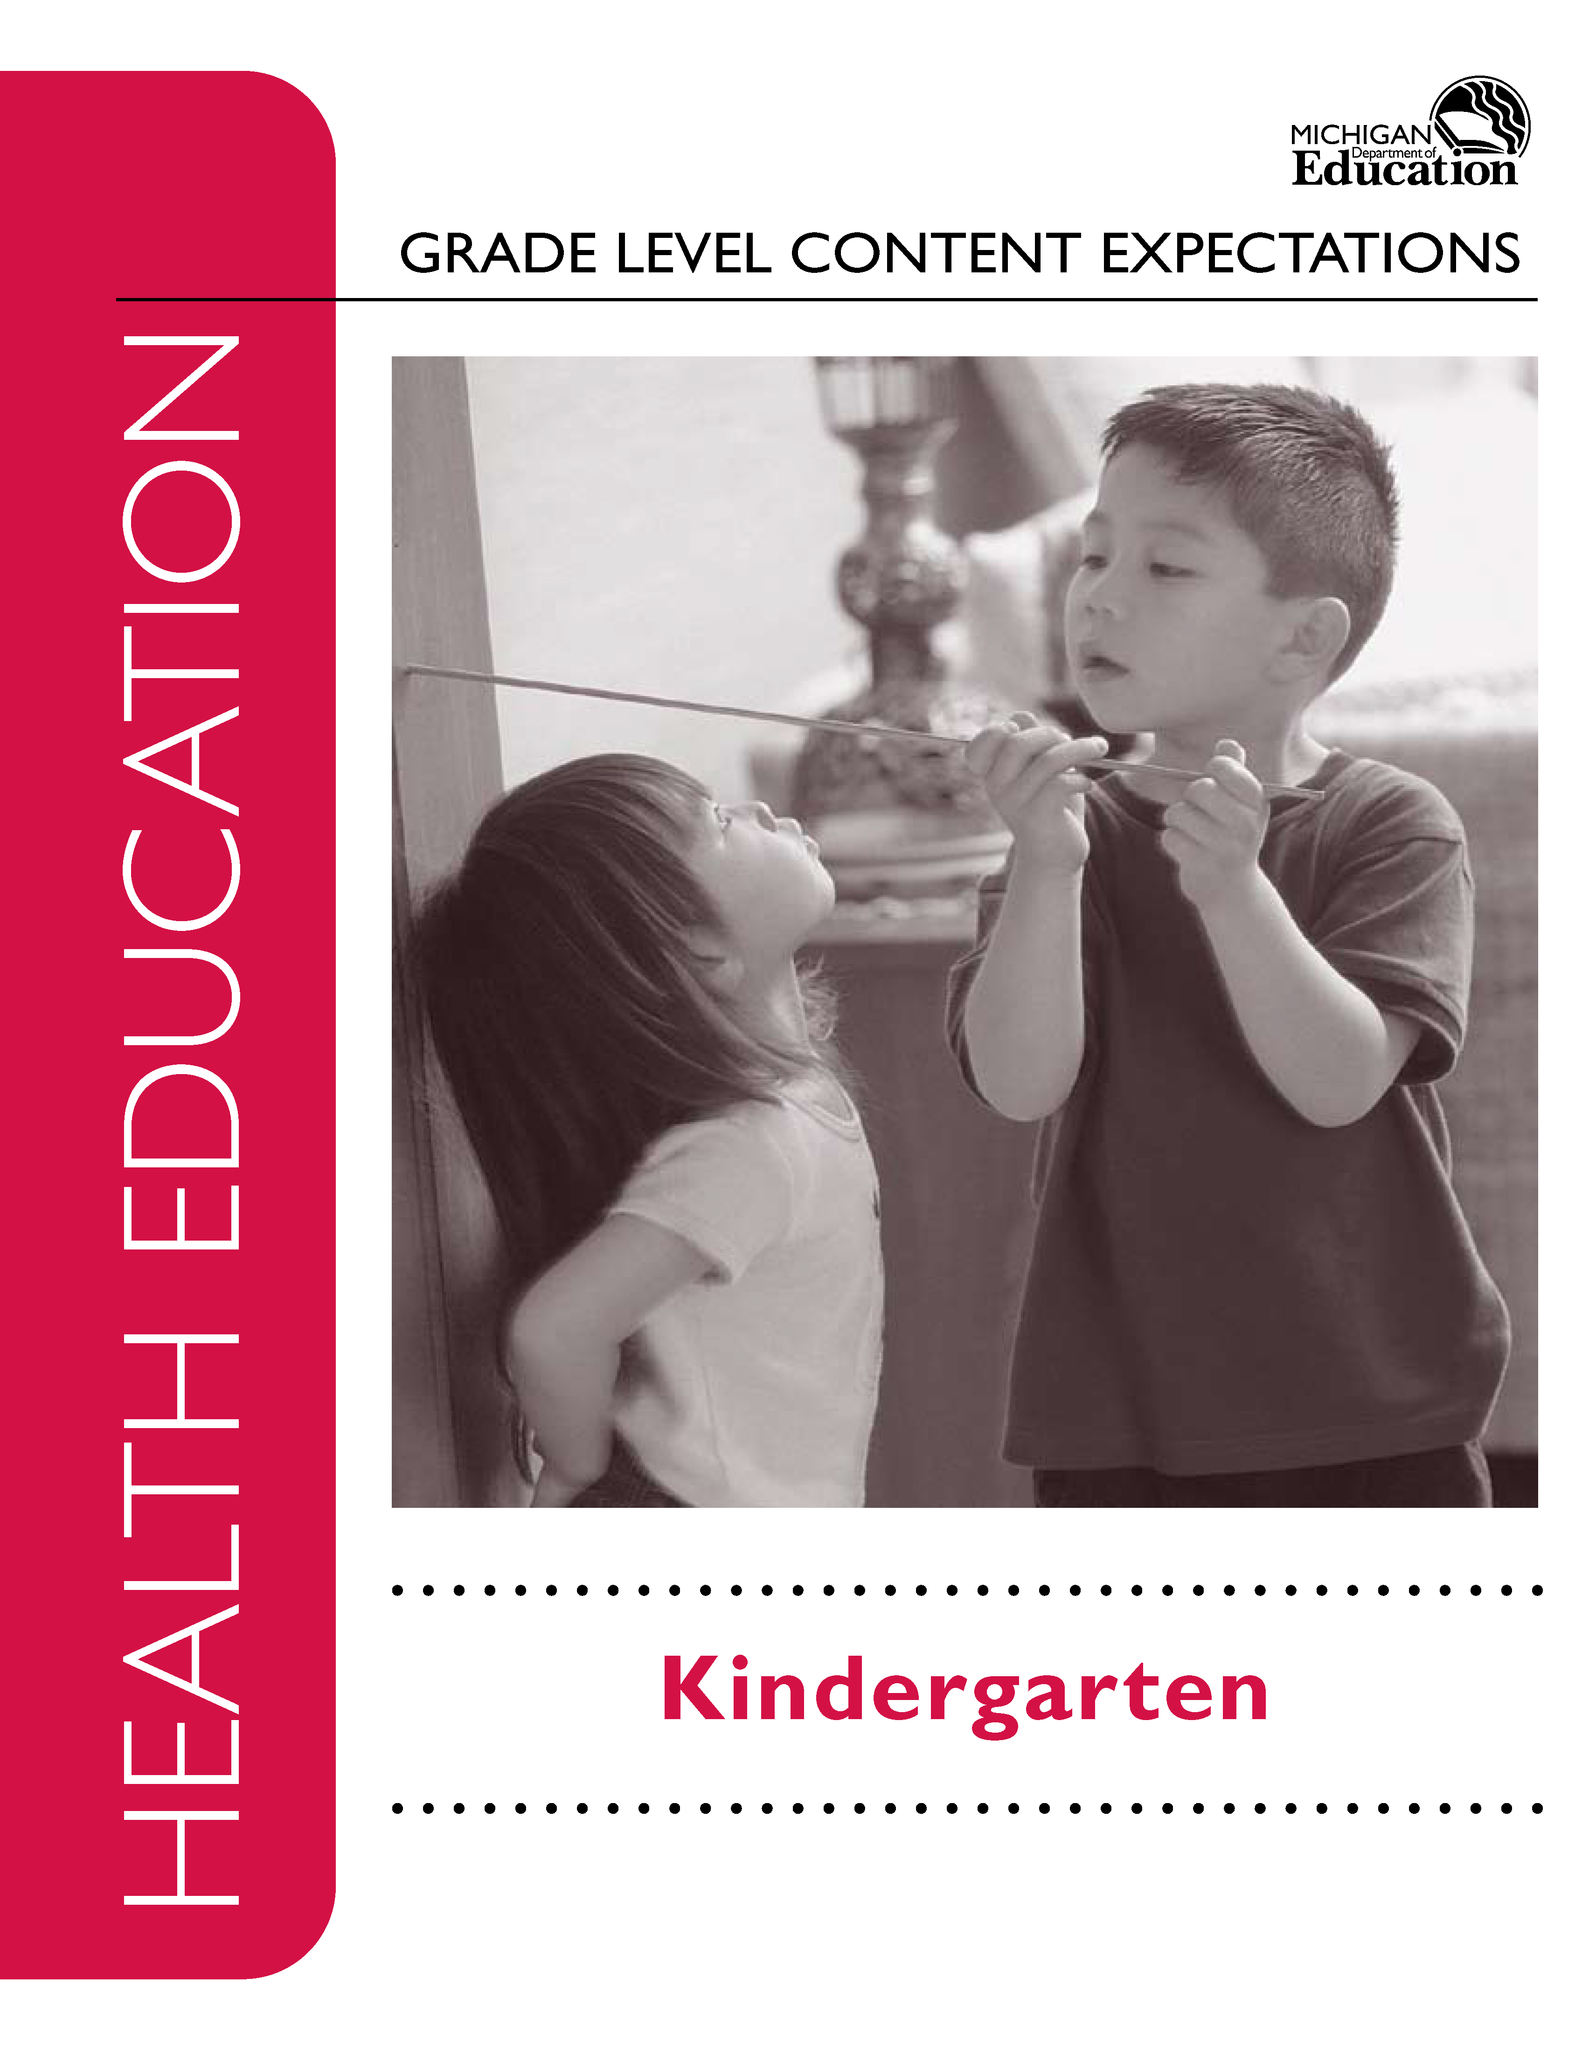 Cover of the Health Education Grade Level Content Expectations book